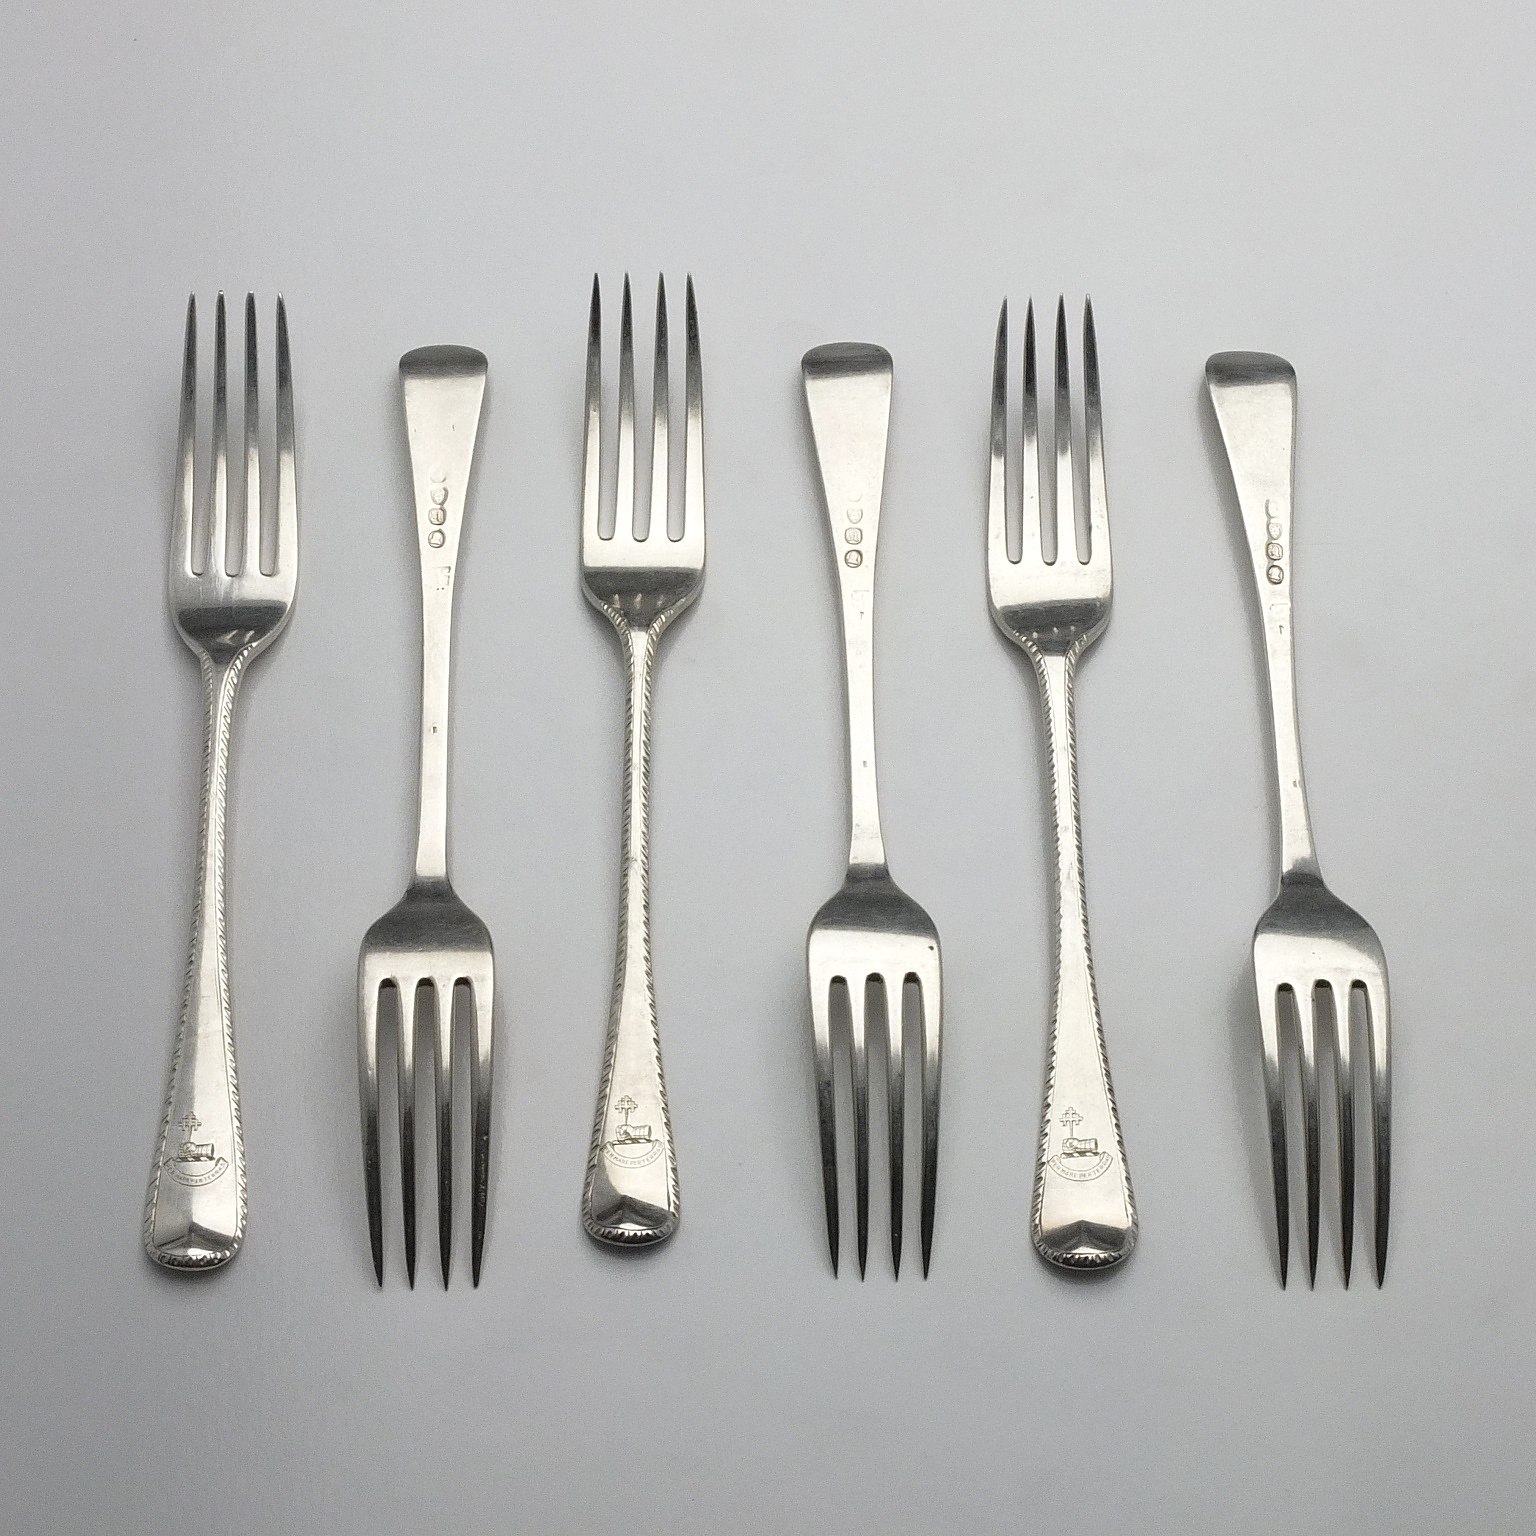 'Six George III Crested Sterling Silver Bright Cut Entree Forks London 1816 and 1817'